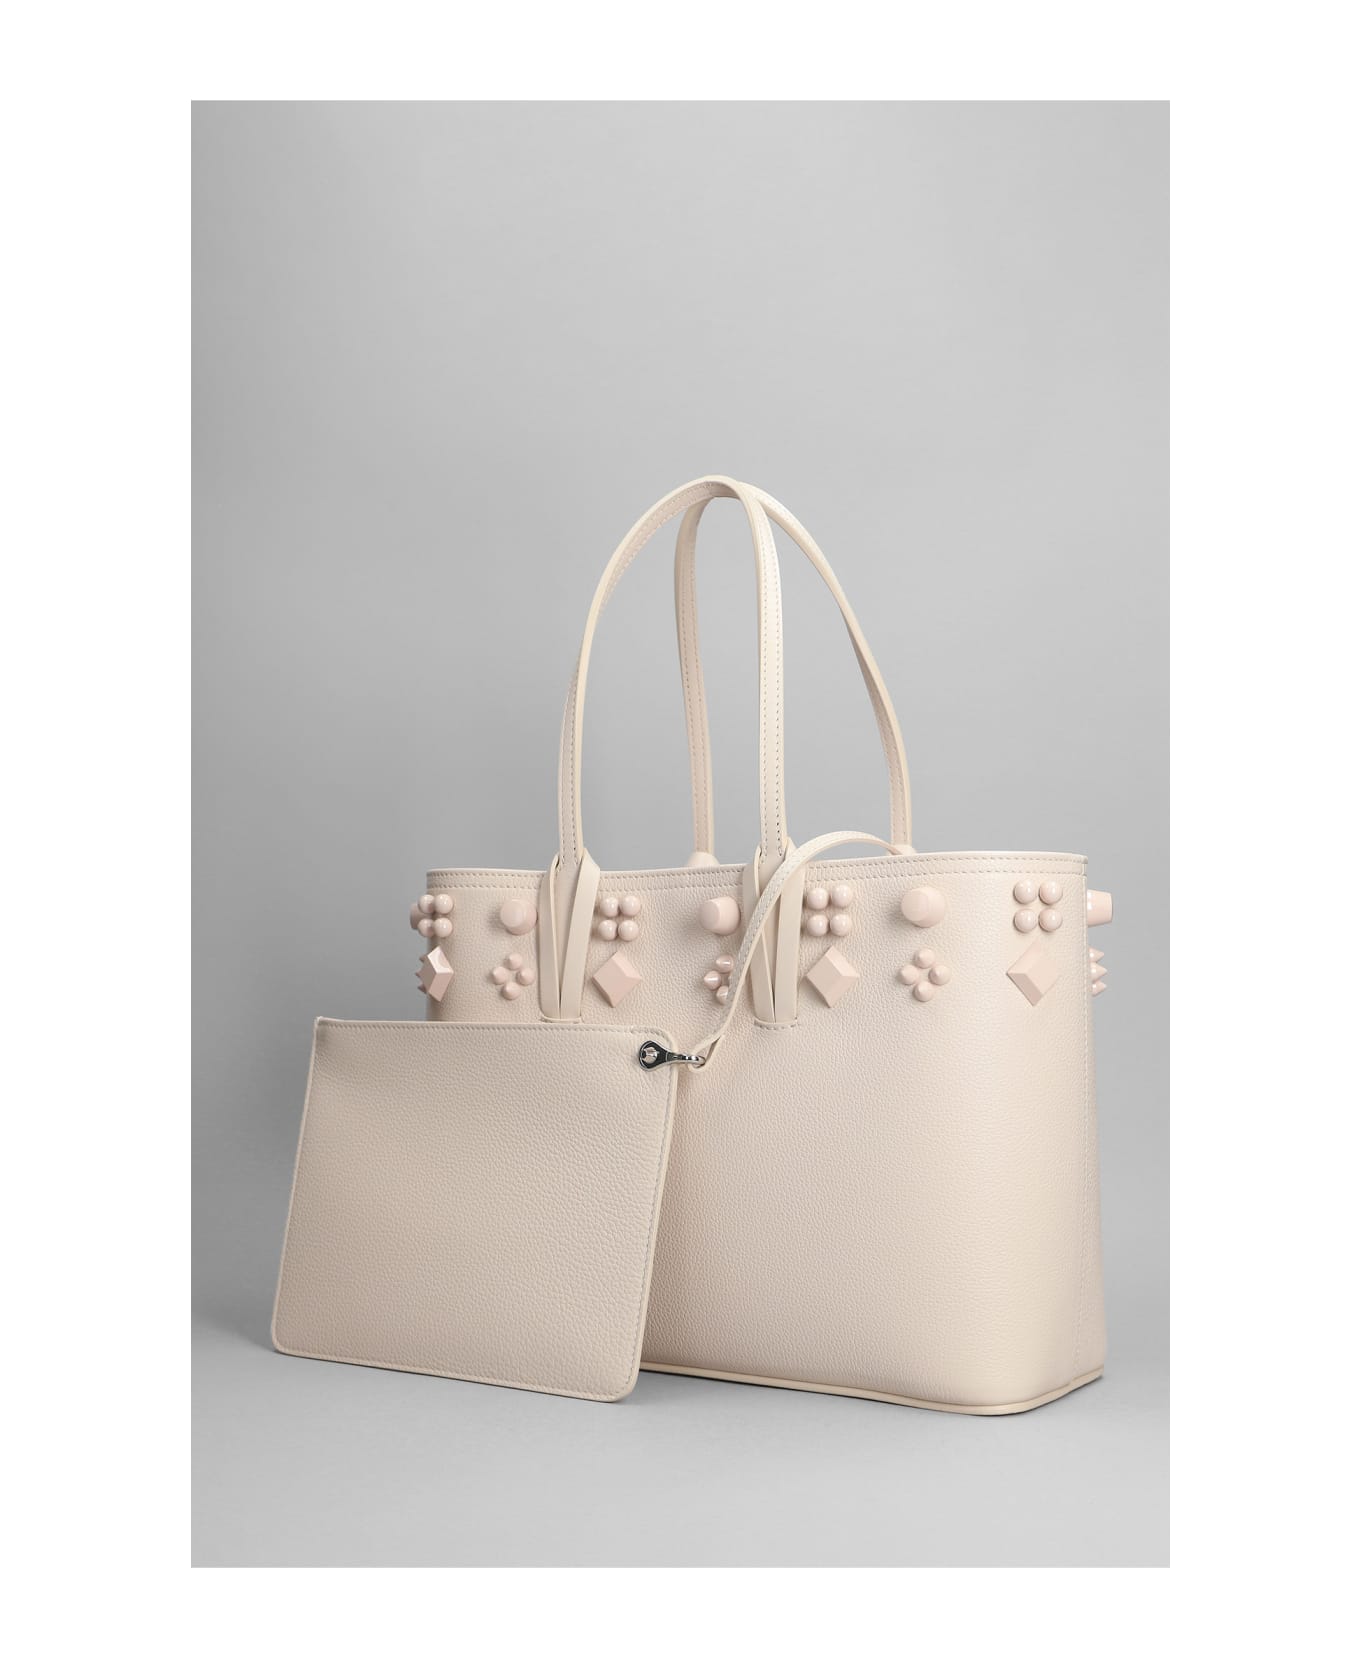 Christian Louboutin Cabata Tote In Powder Leather - Nude & Neutrals